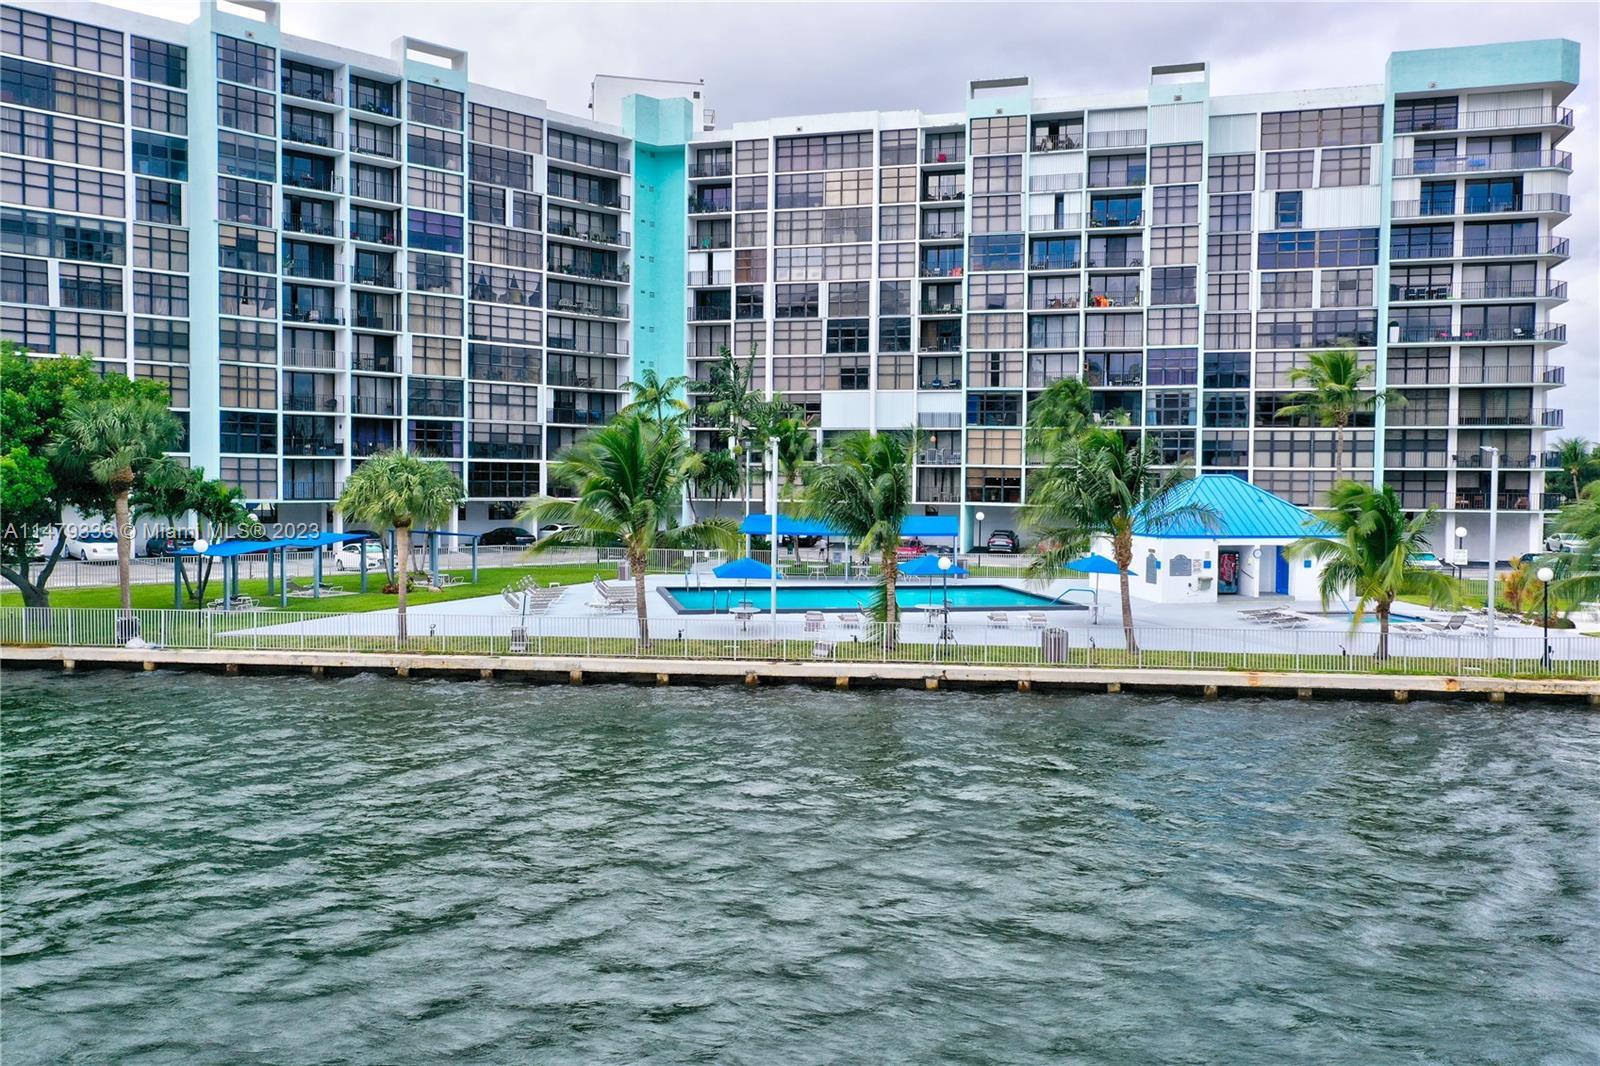 Enjoy endless ocean and intracoastal views in this magnificient  condo.
This remodeled captivating 